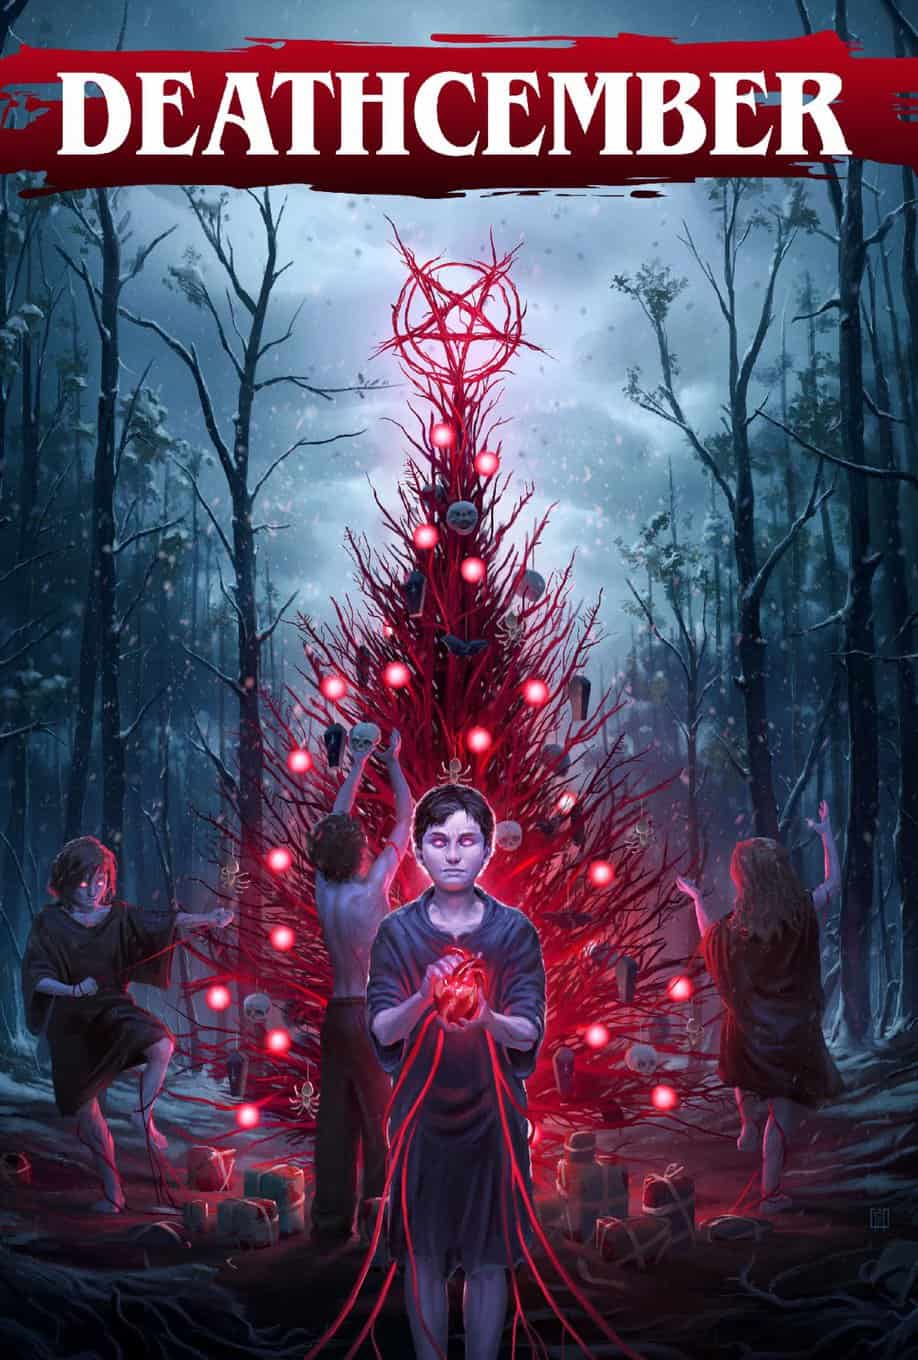 Deathcember, the Horror Advent Calendar opens up on Shout! Factory TV